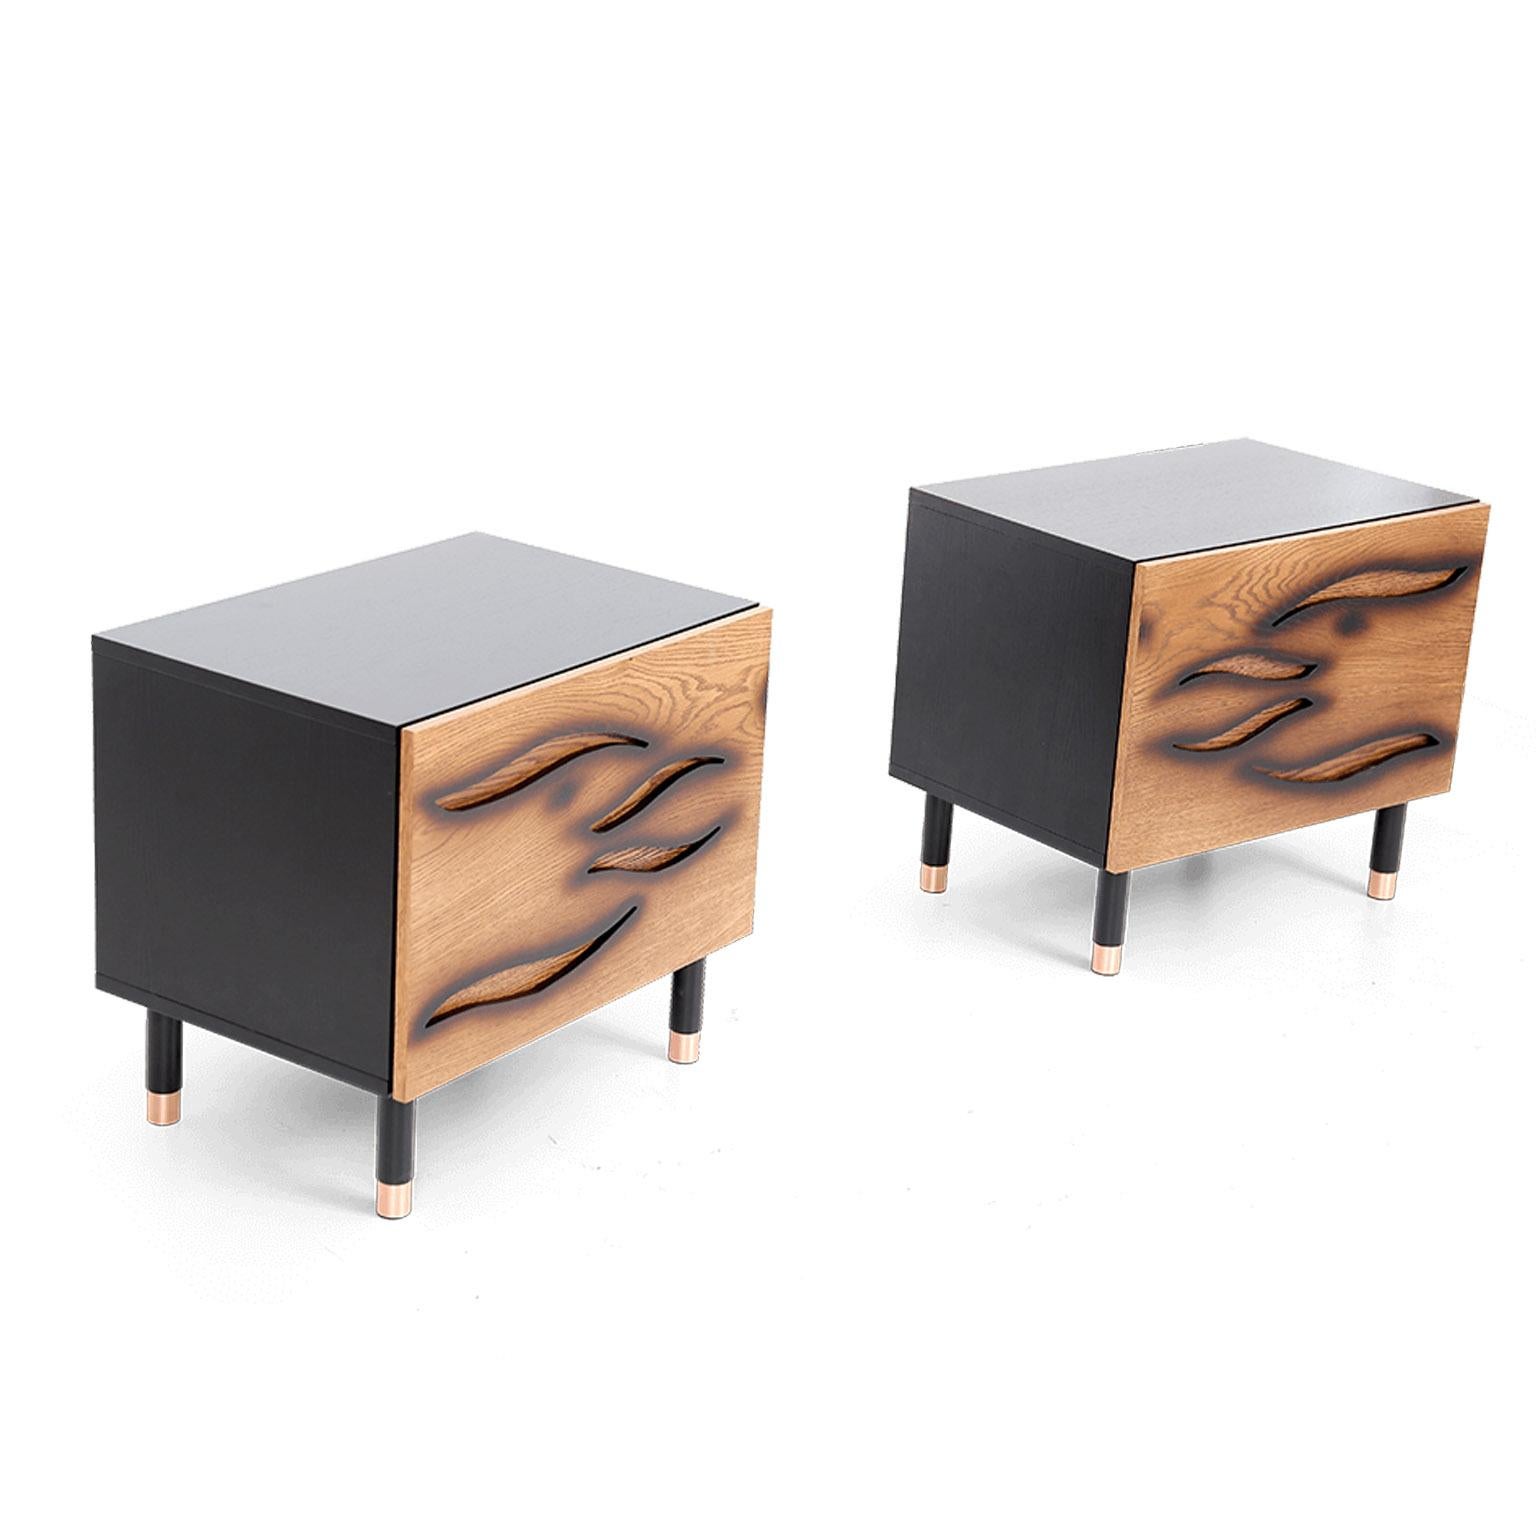 European Contemporary Chic Brown Side table or Bedroom Nightstands set of 2 For Sale